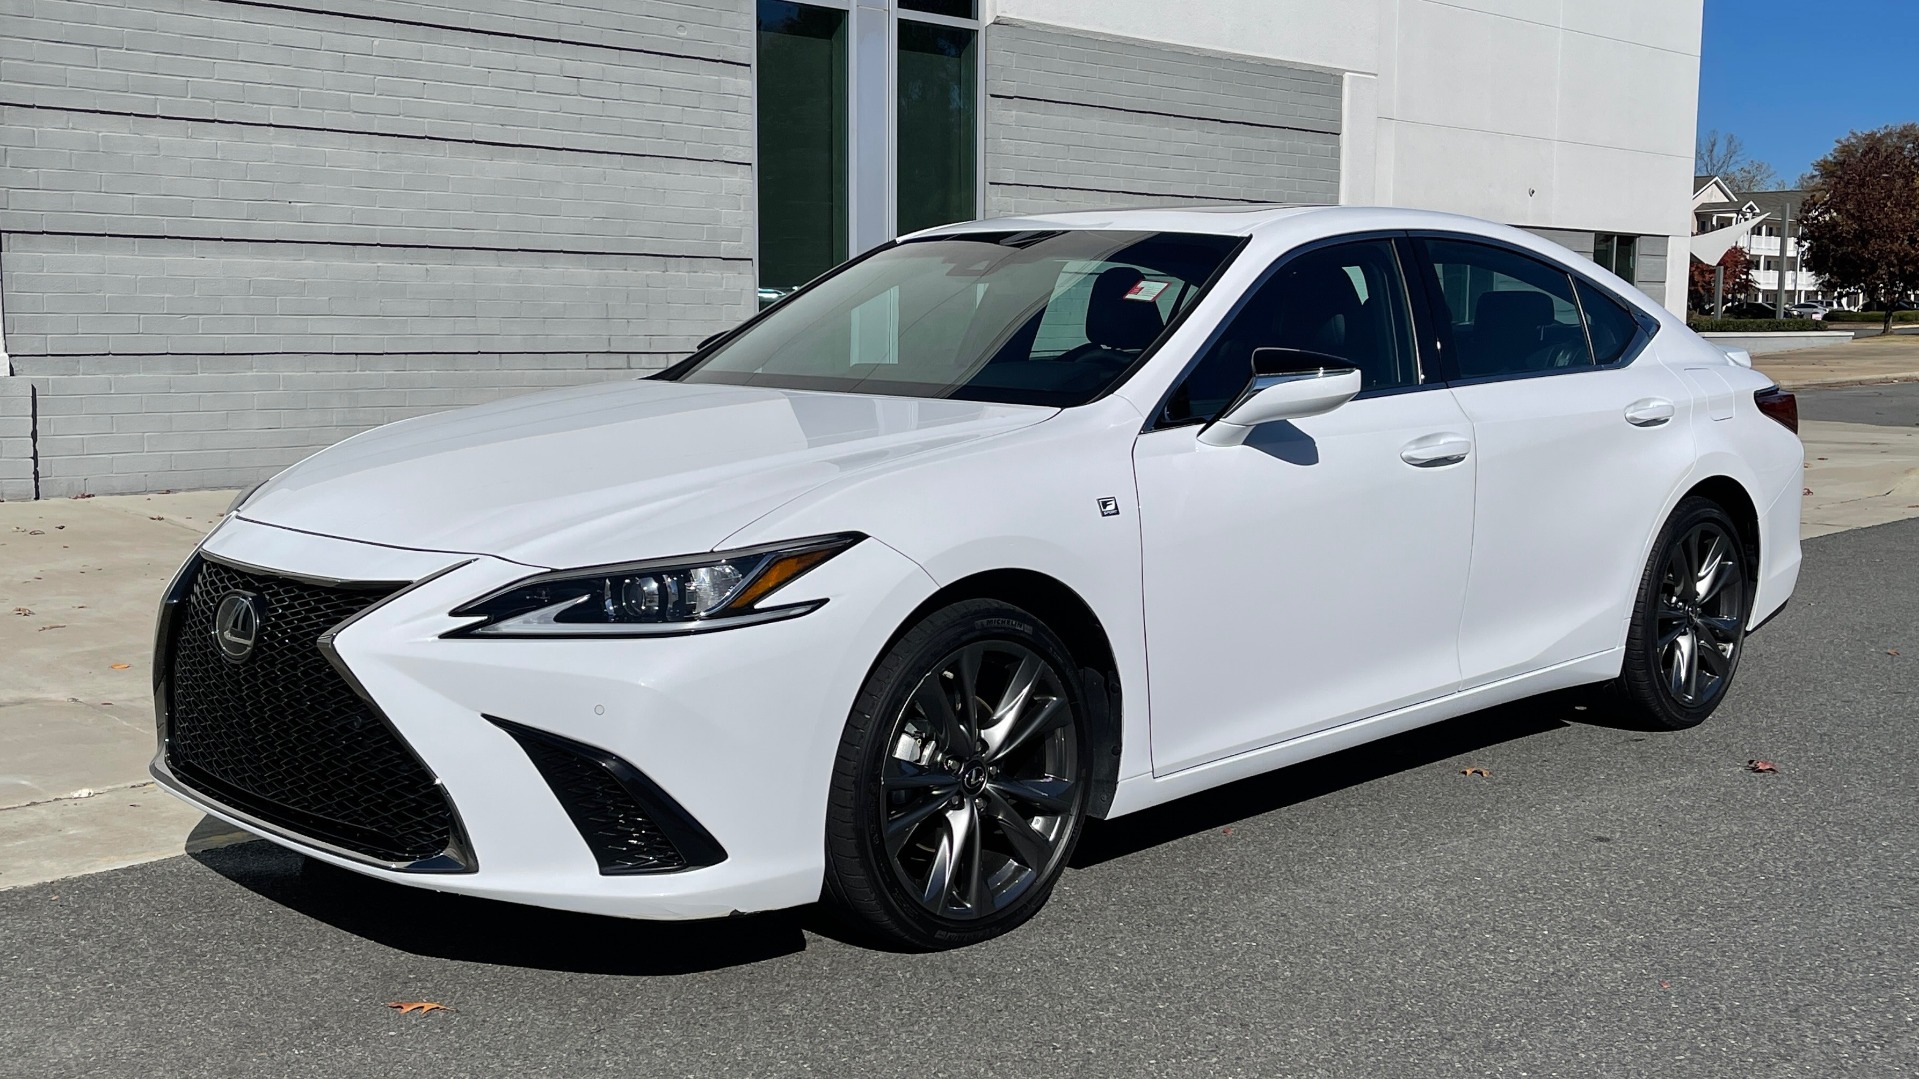 Used 2019 Lexus ES 350 F-SPORT 3.5L SEDAN / 8-SPD / NAV / SUNROOF / REARVIEW for sale Sold at Formula Imports in Charlotte NC 28227 2